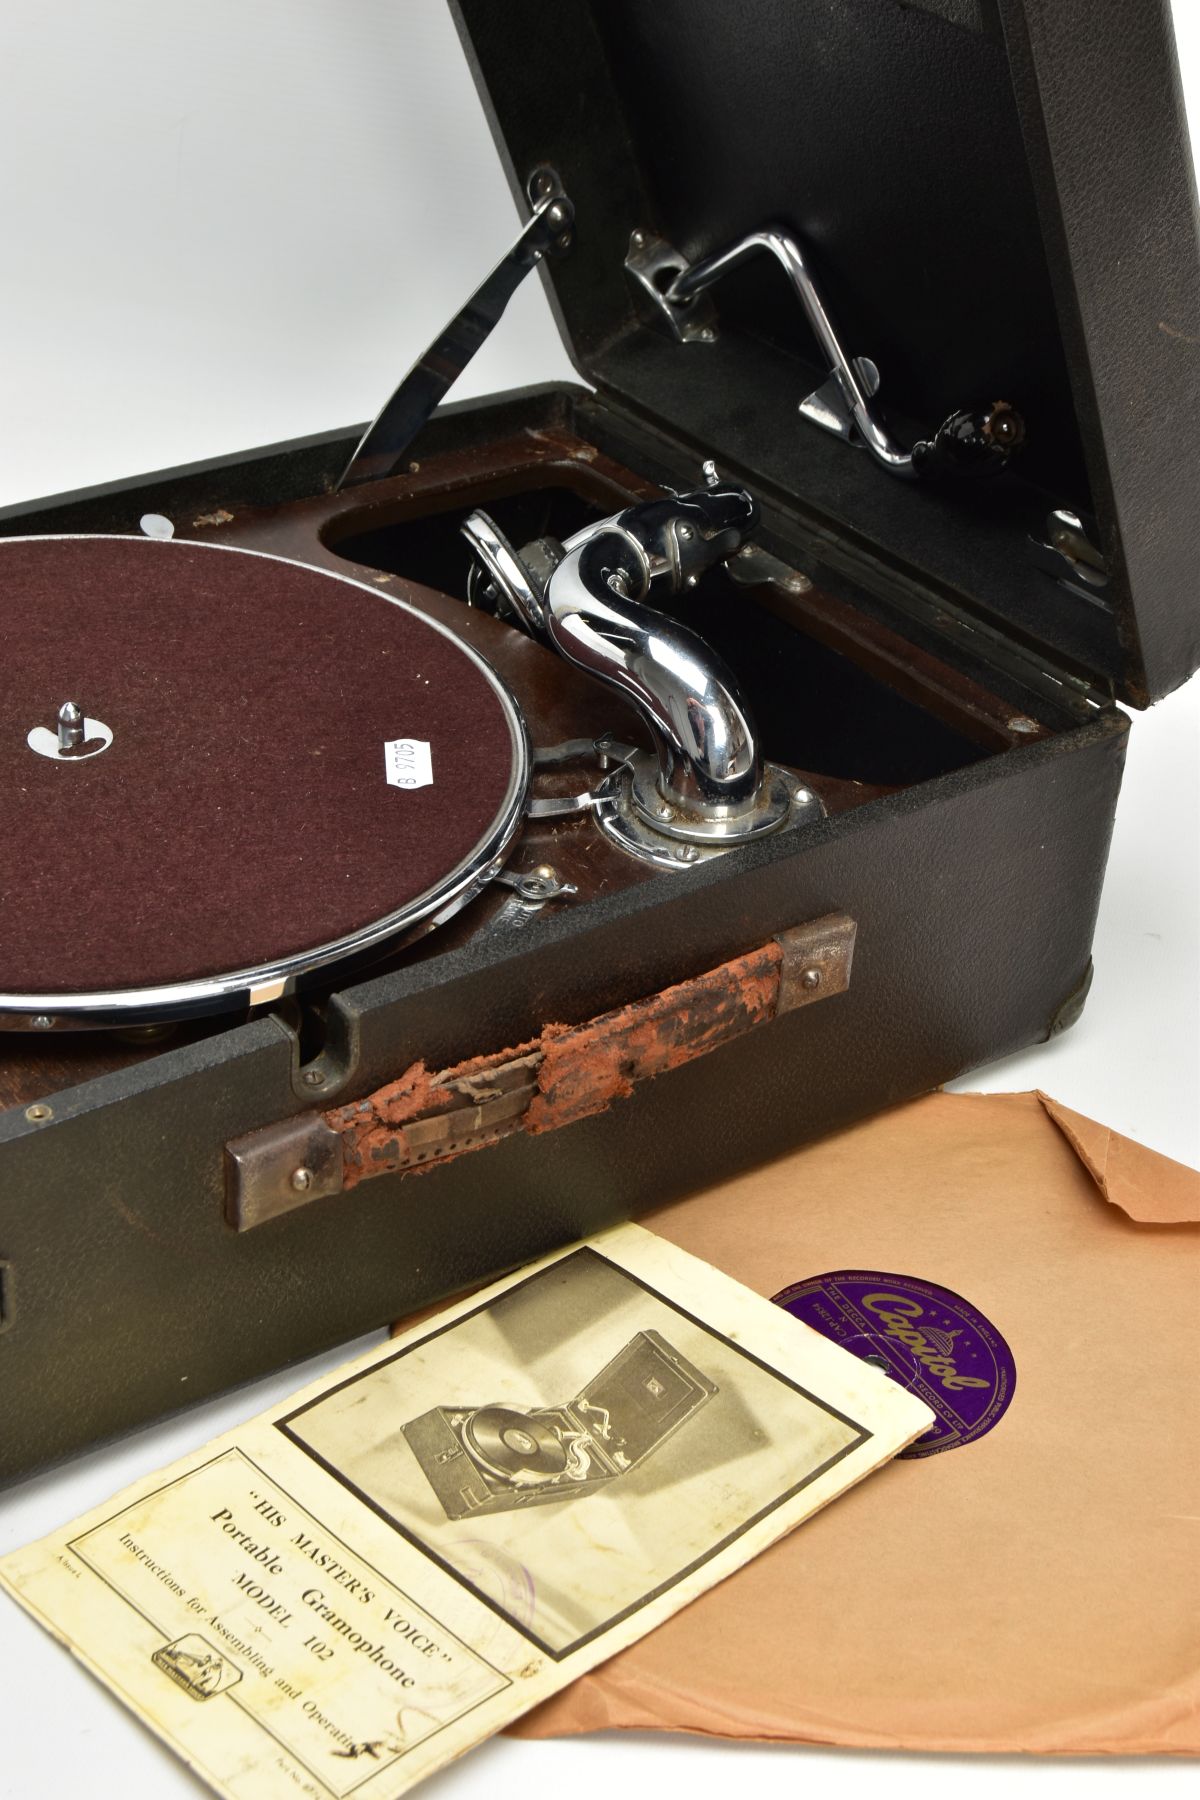 A HMV BLACK CASED PORTABLE GRAMOPHONE MODEL 102, with printed instructions and a Nat King Cole - Image 6 of 7